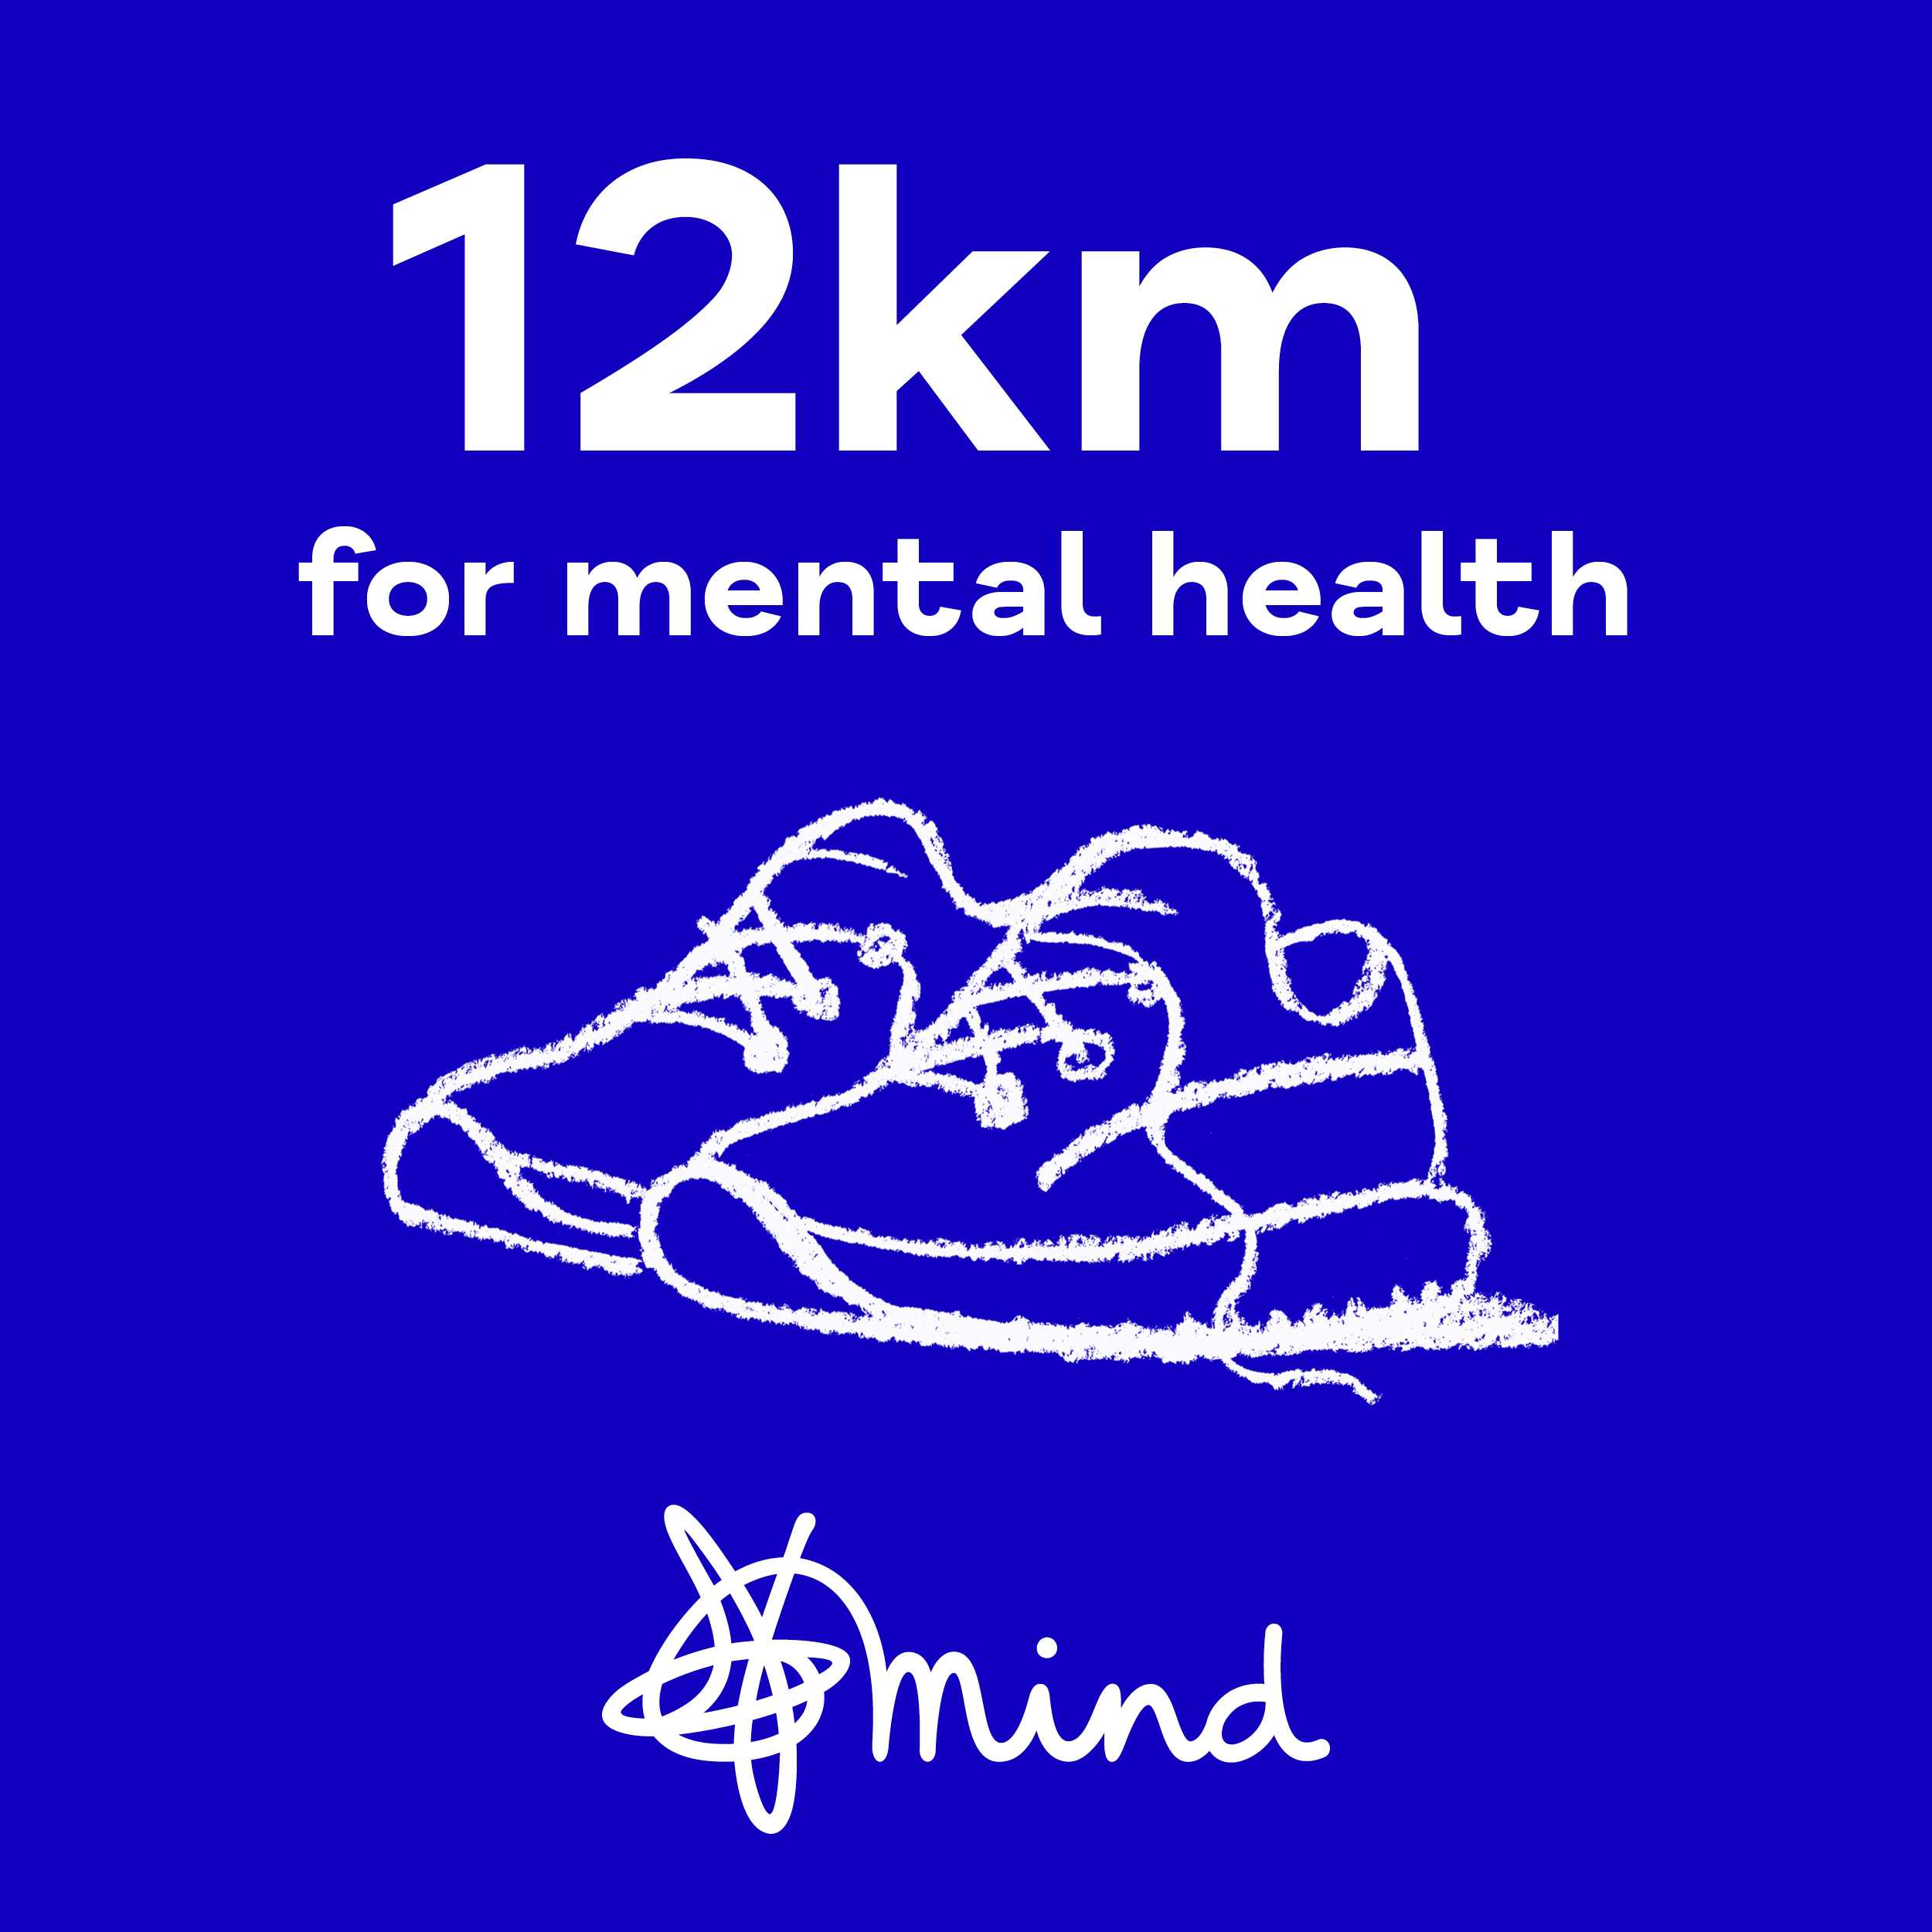 The words '12km for mental health' with an illustration of a pair of trainers and the Mind logo.